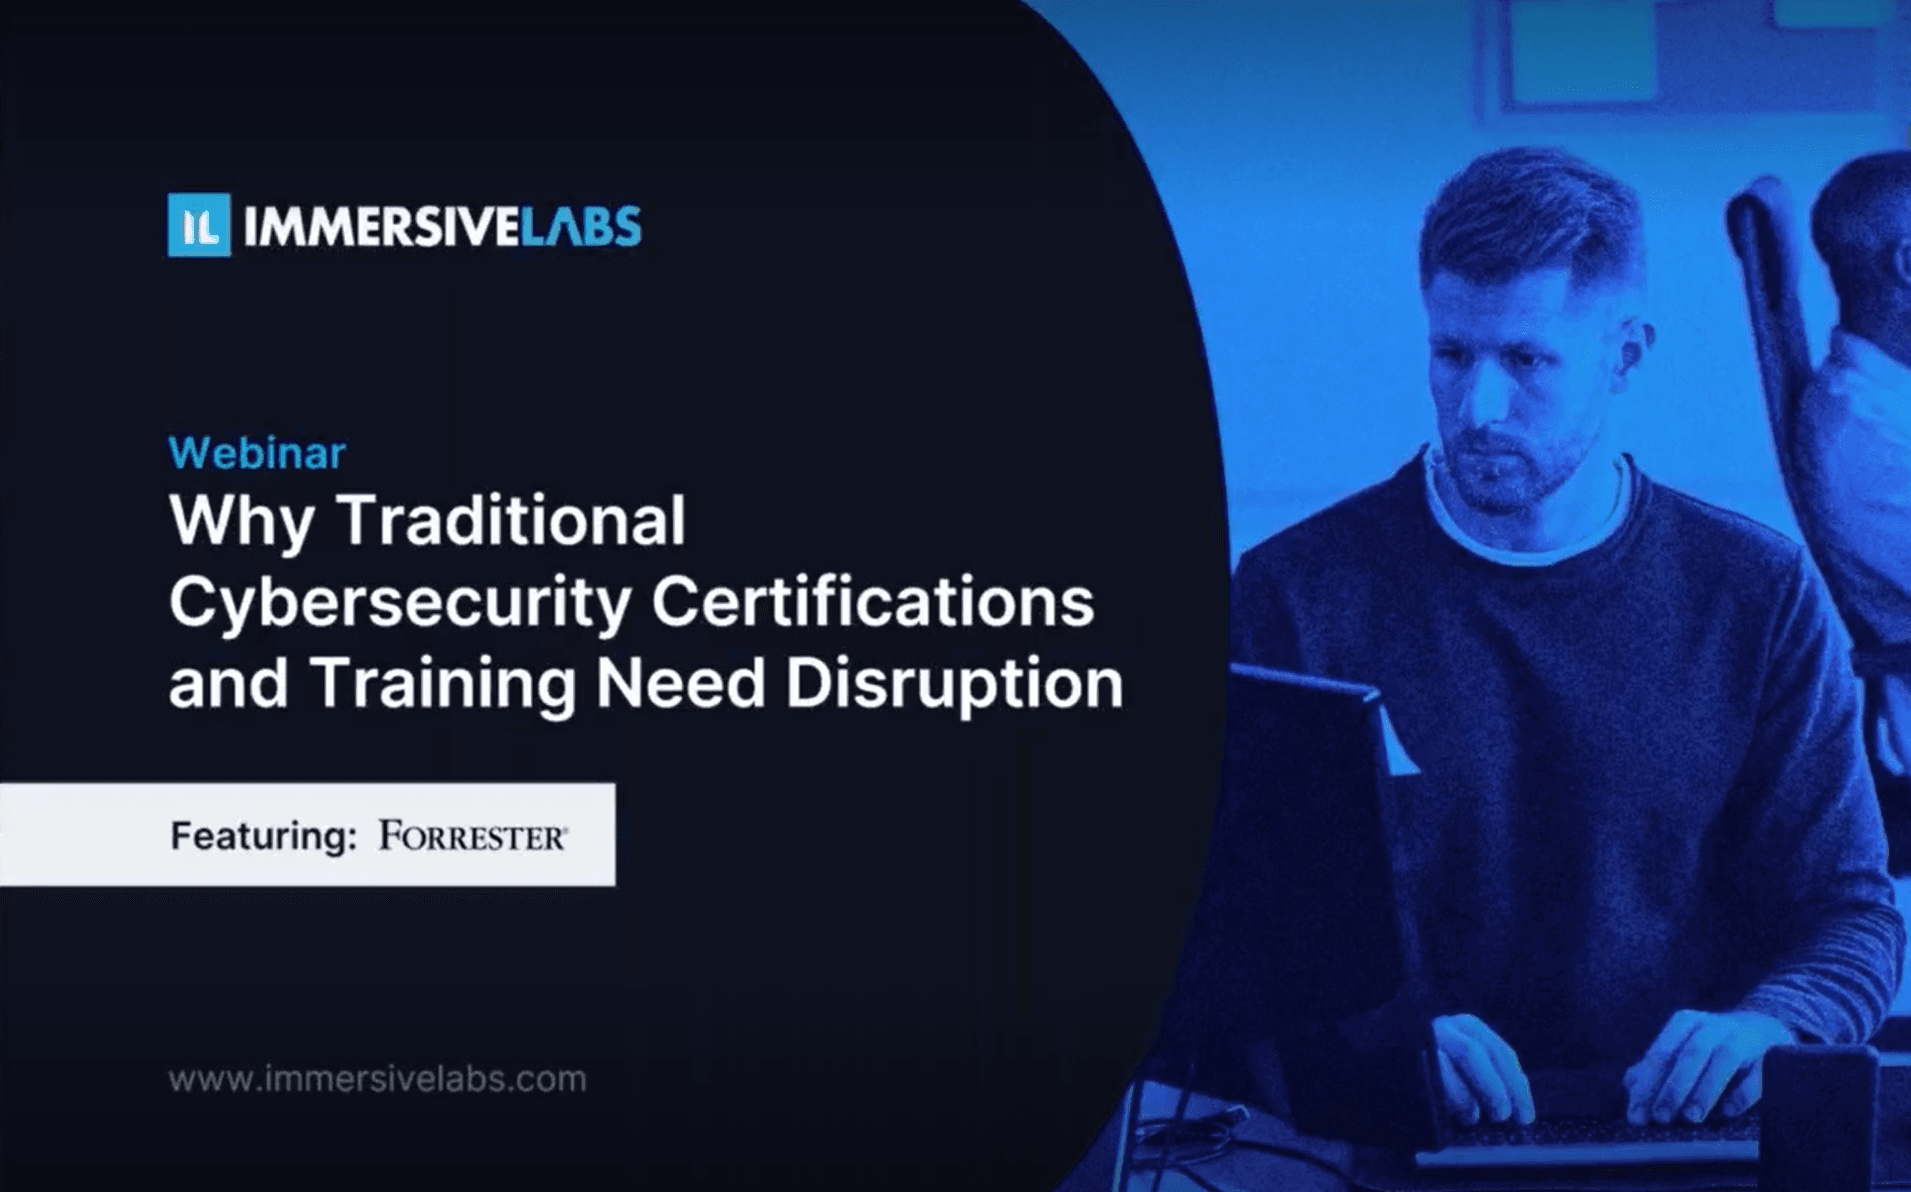 Why Traditional Cybersecurity Certifications and Training Need Disruption